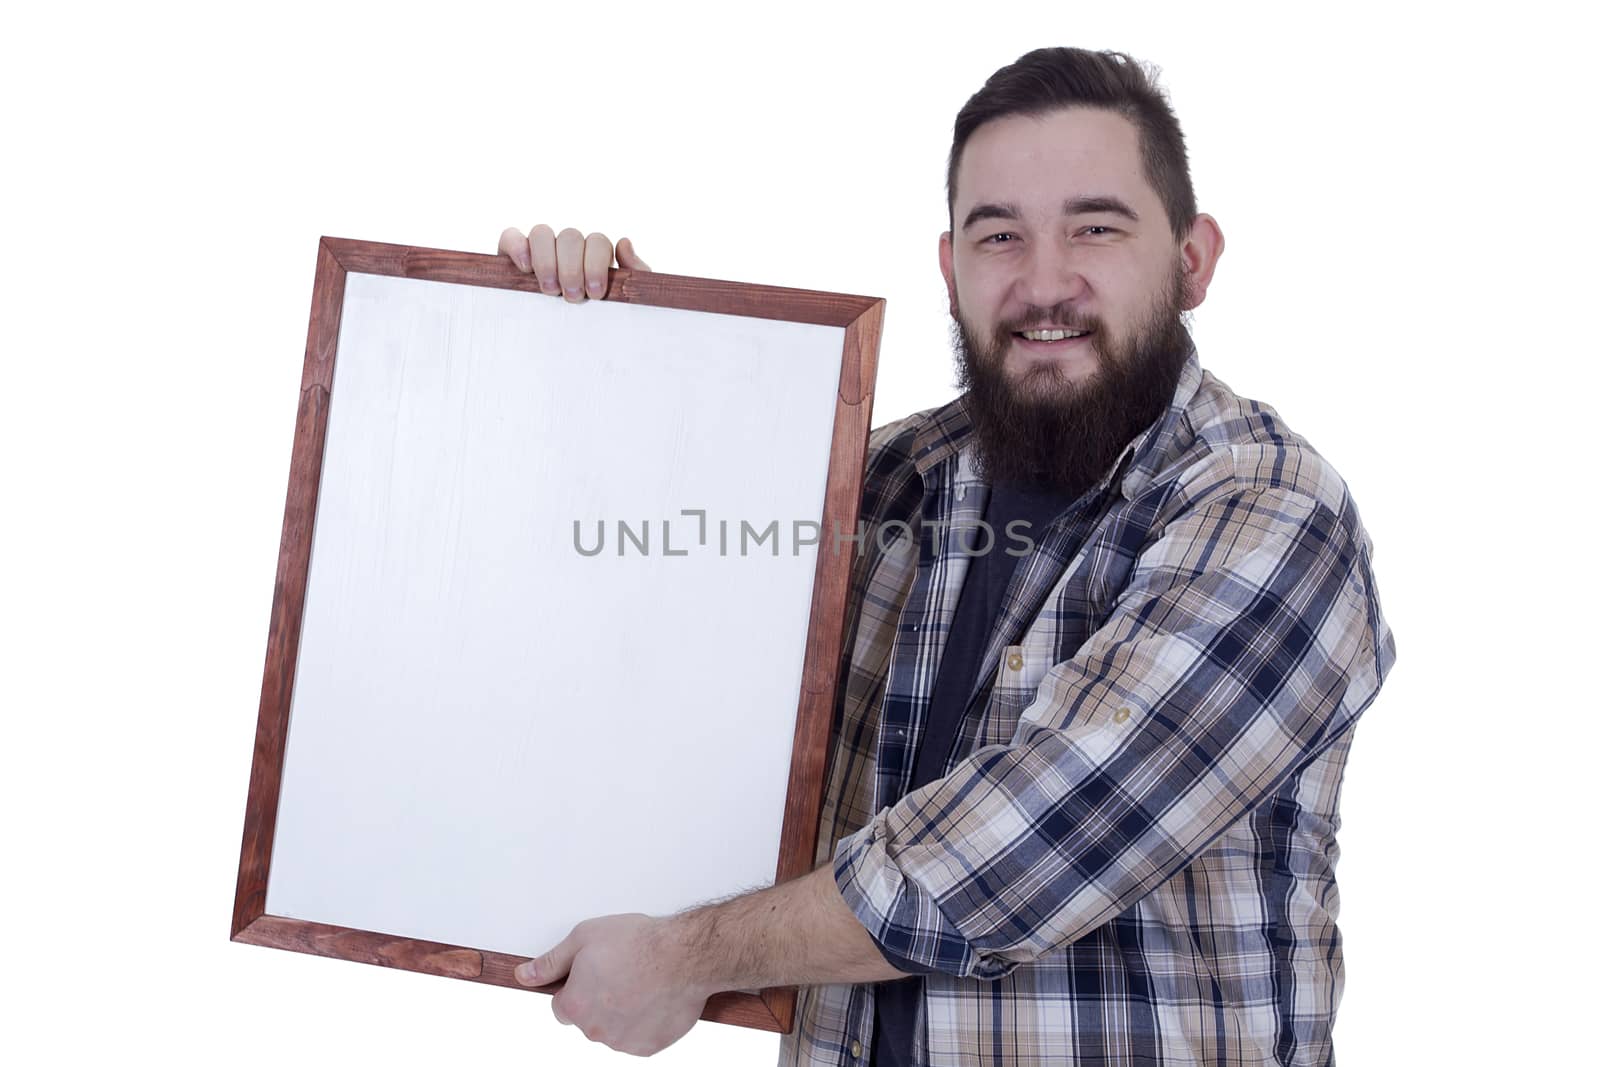 Smiling bearded young man with white board in hands